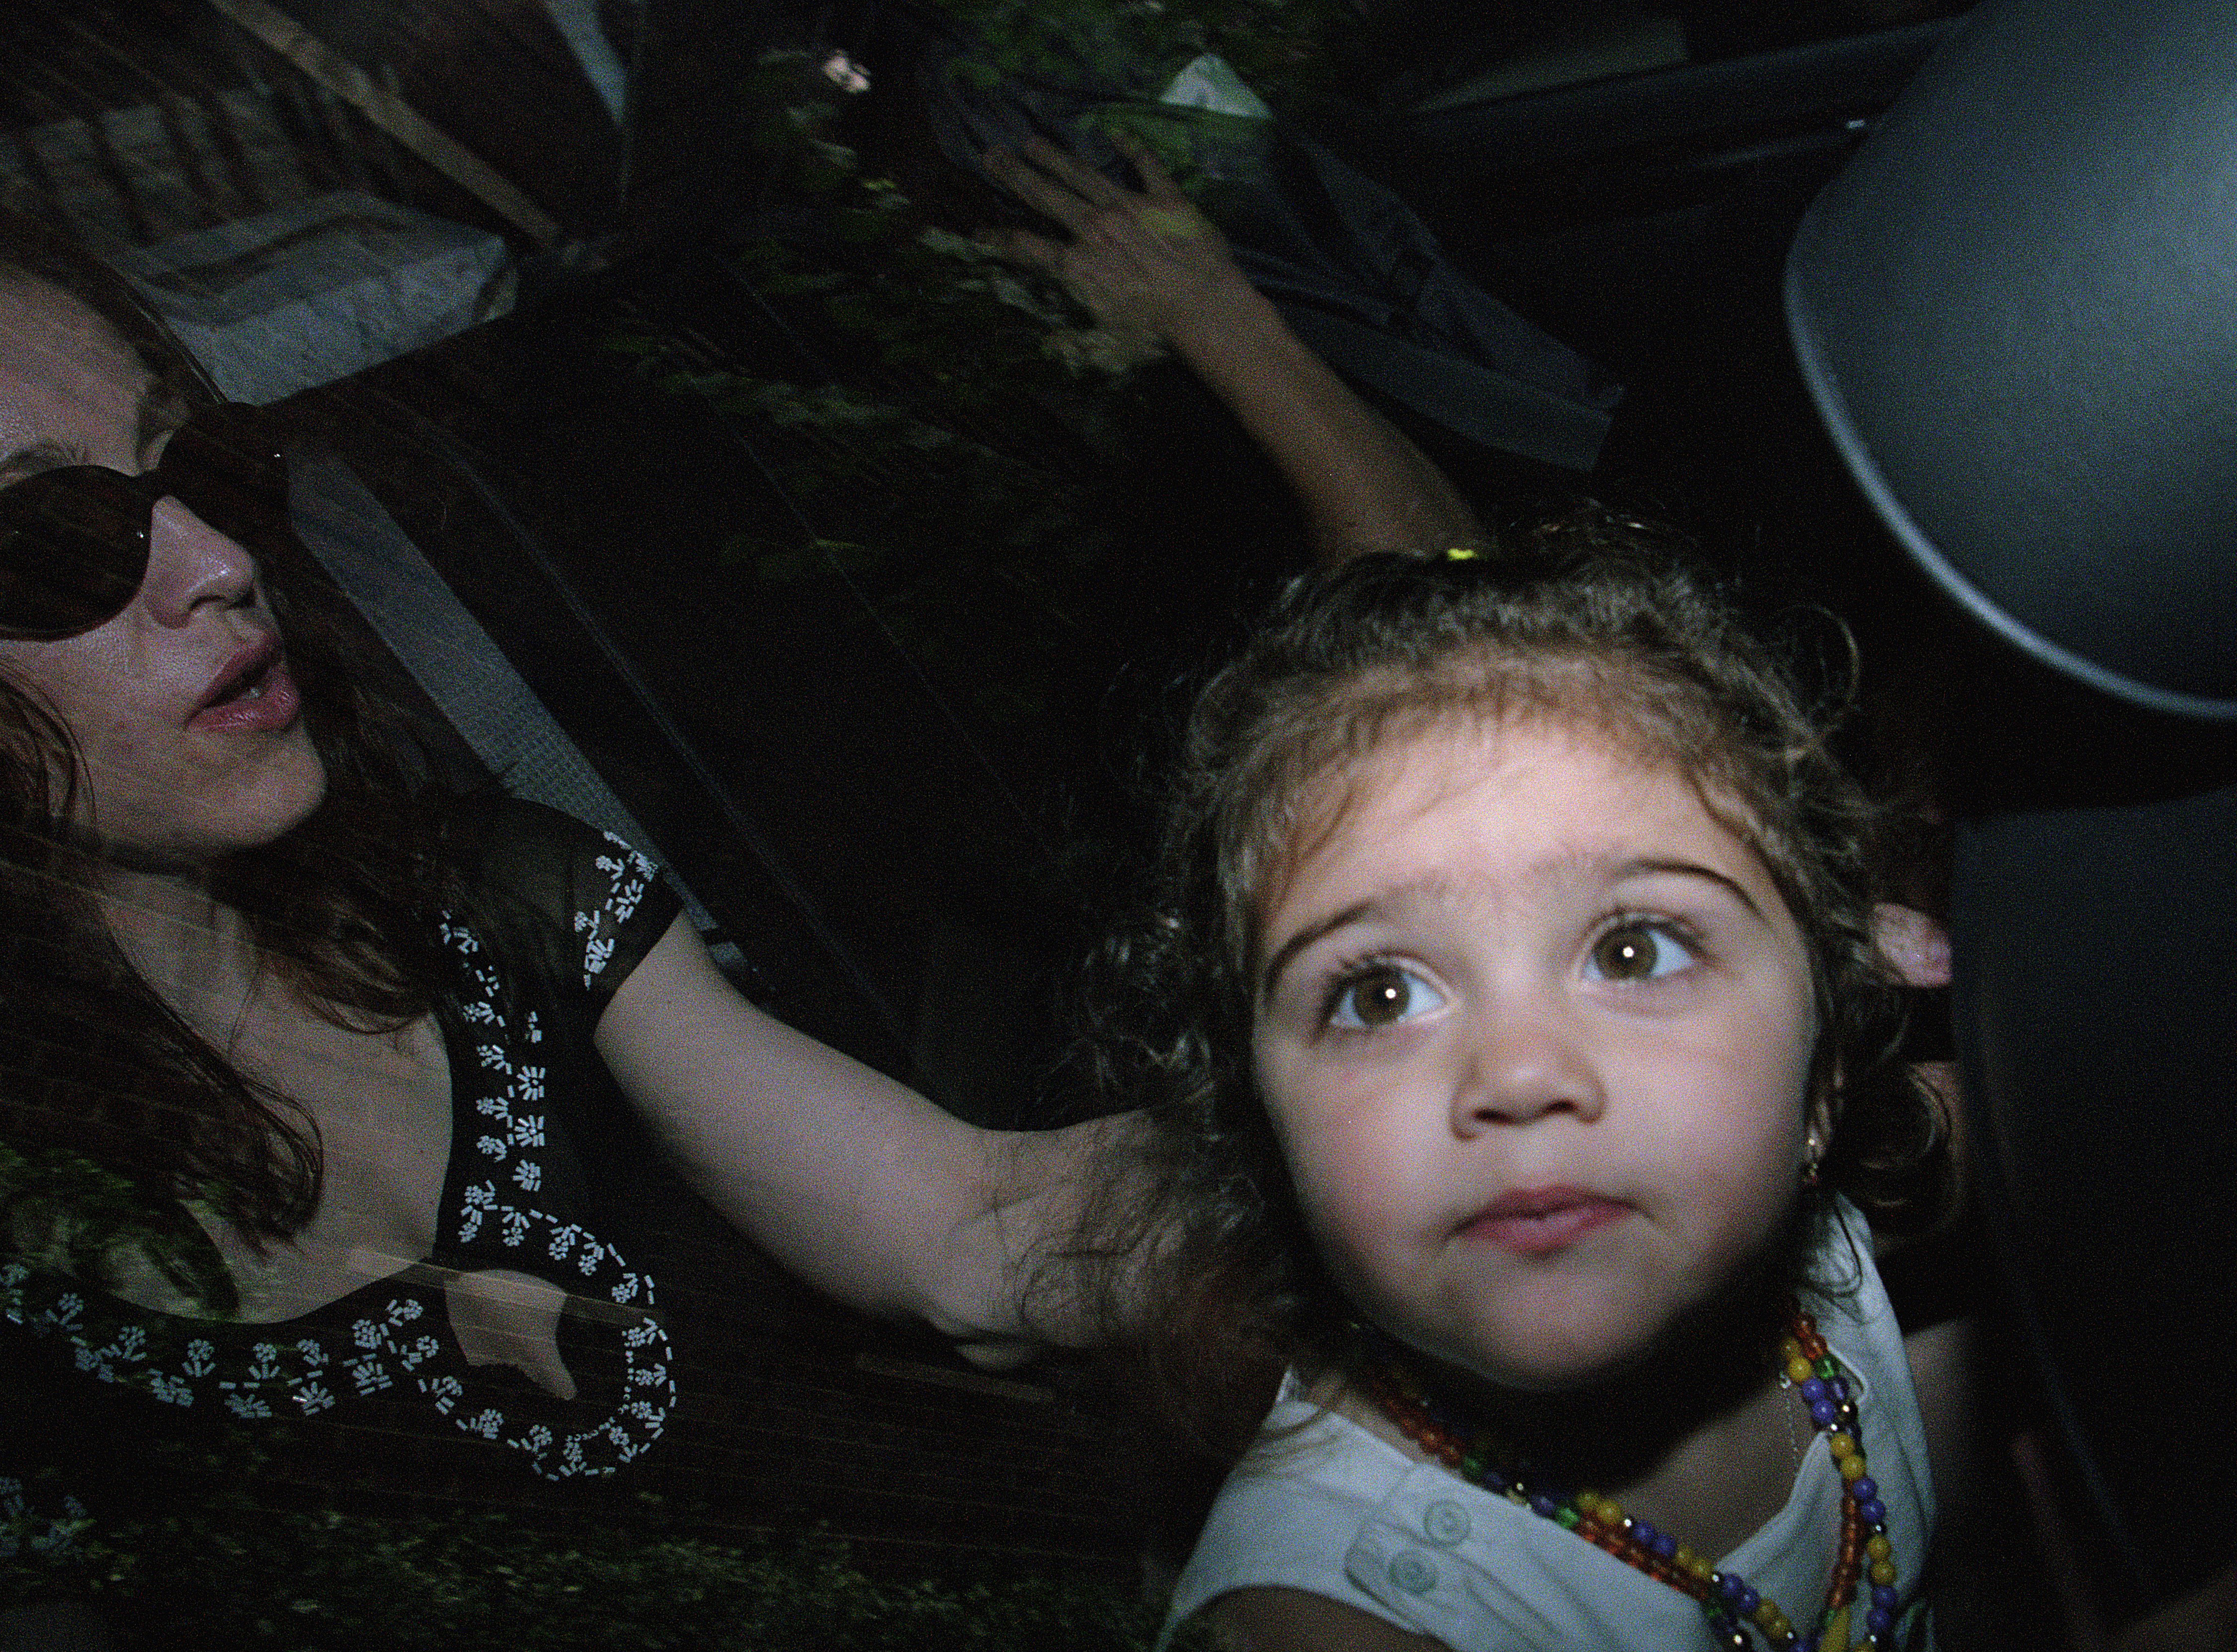 Madonna going on a drive with daughter Lourdes "Lola" Leon on July 4, 1998 | Source: Getty Images